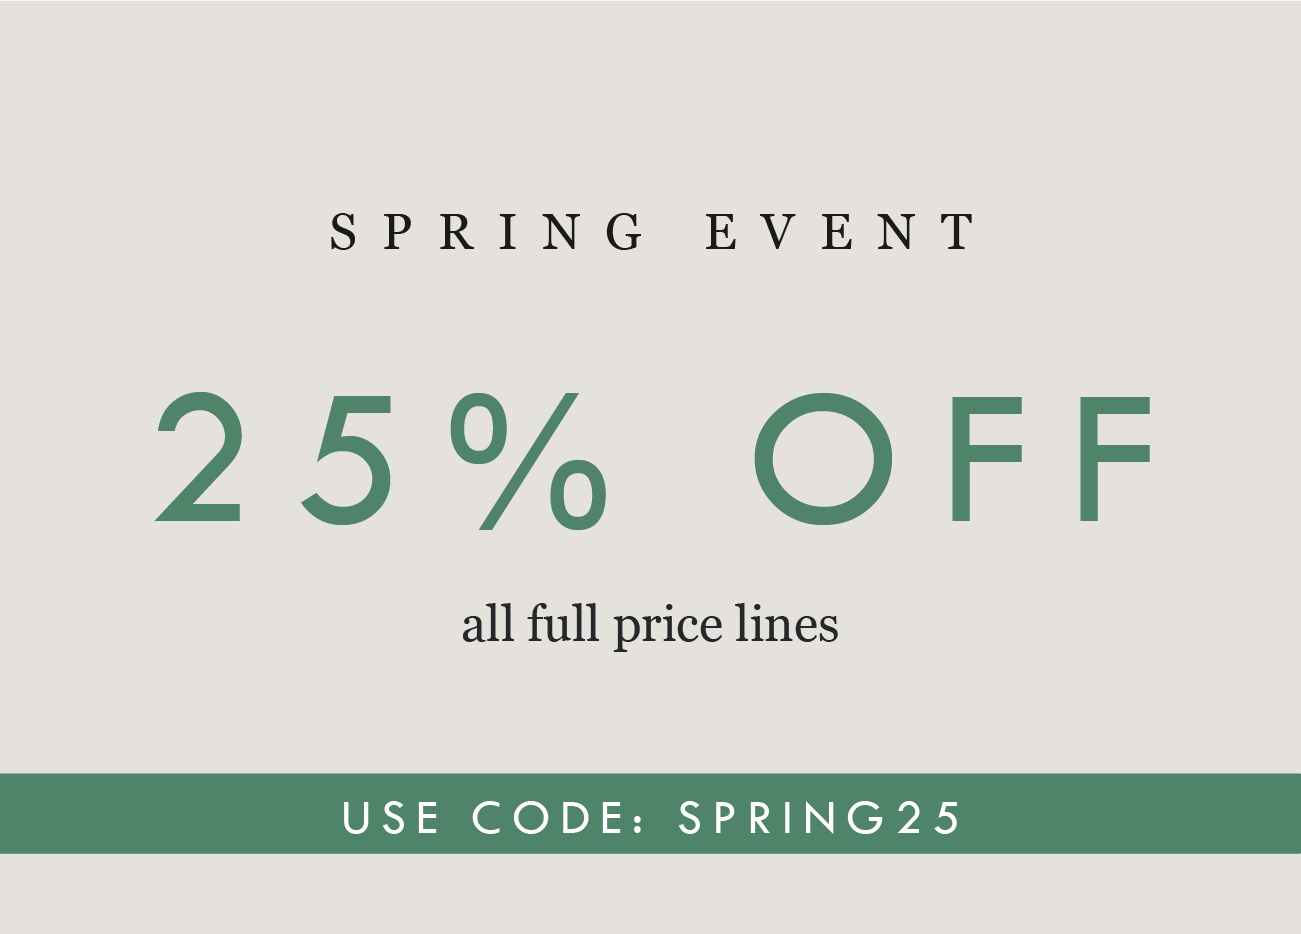 SPRING EVENT 
25% OFF
all full price lines

USE CODE: SPRING25